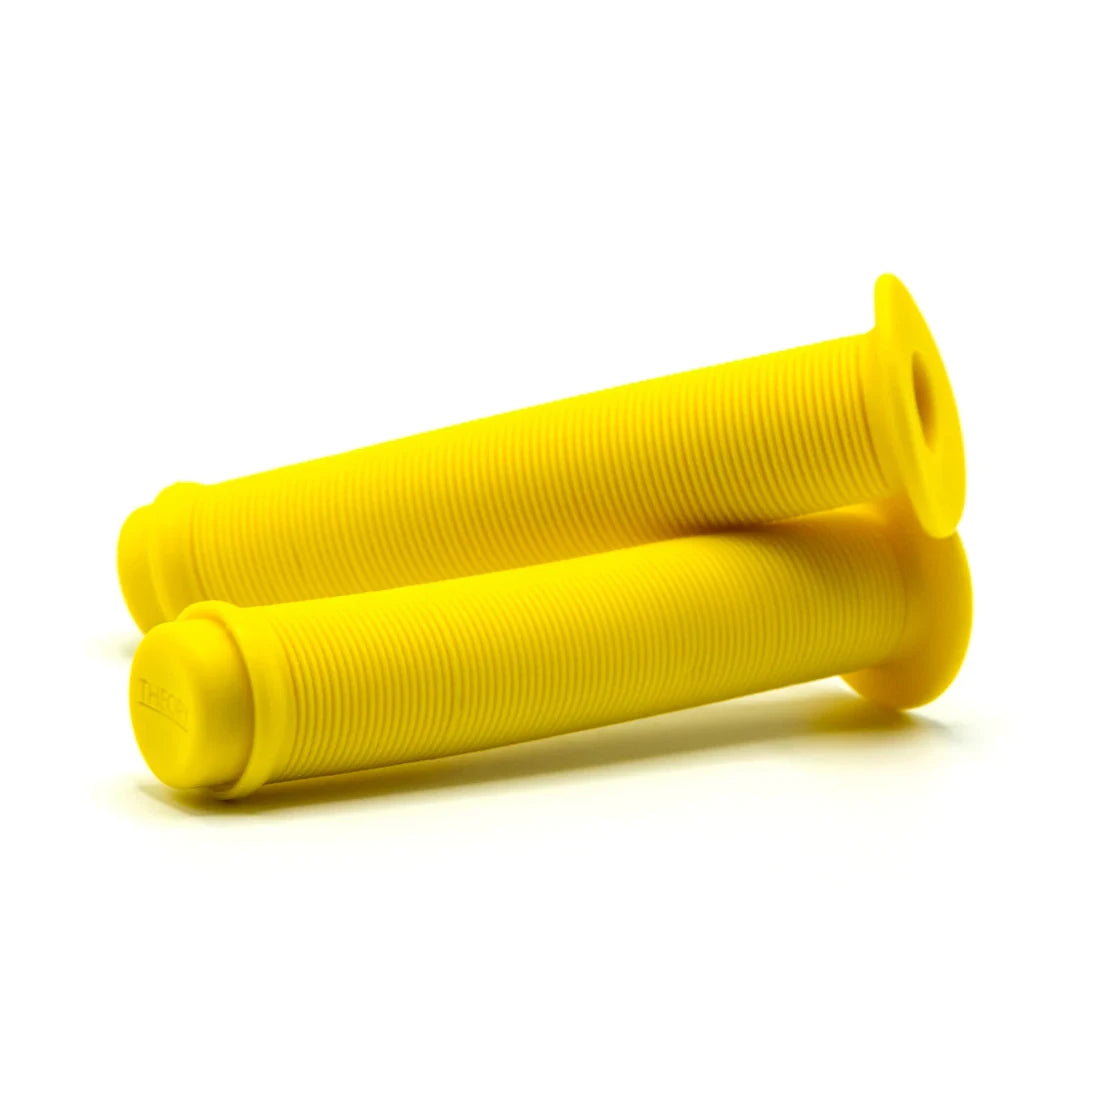 Theory Data Grips w/ Bar Ends - Flanged - Yellow